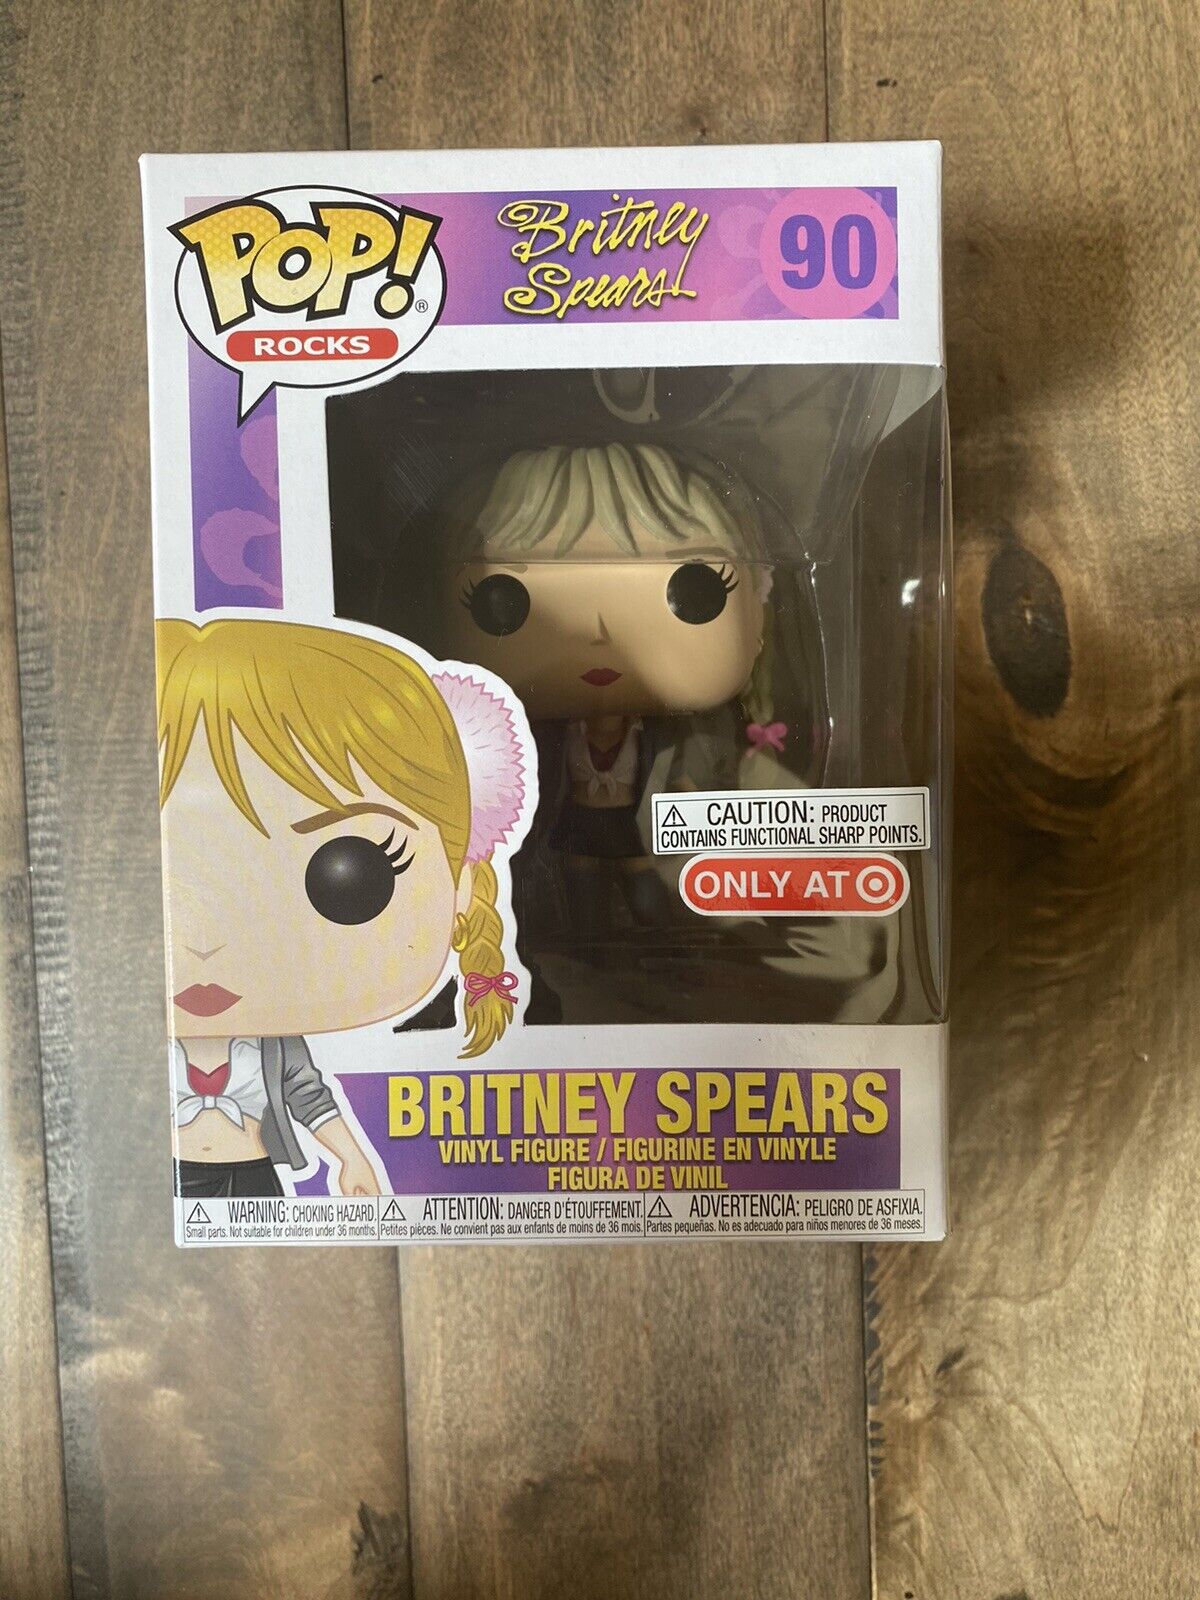 FUNKO POP ROCKS BRITNEY SPEARS # 90 Baby One More Time EXCLUSIVE TARGET 2018